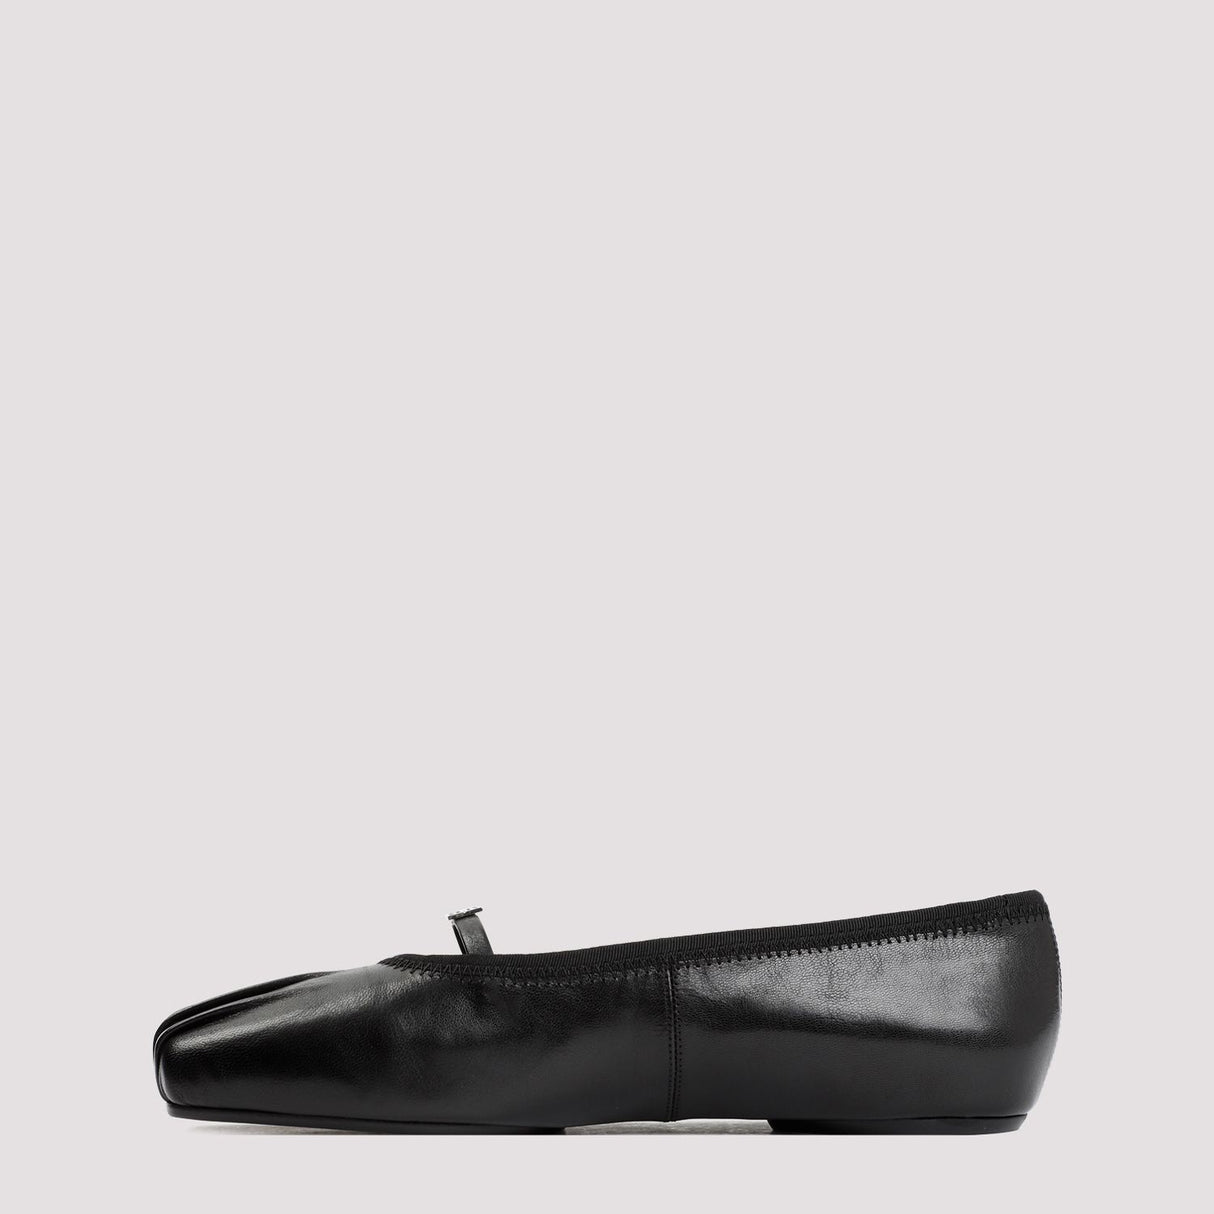 Black Leather Ballet Ballerinas for Women - Elegant and Comfortable Flats from GIVENCHY